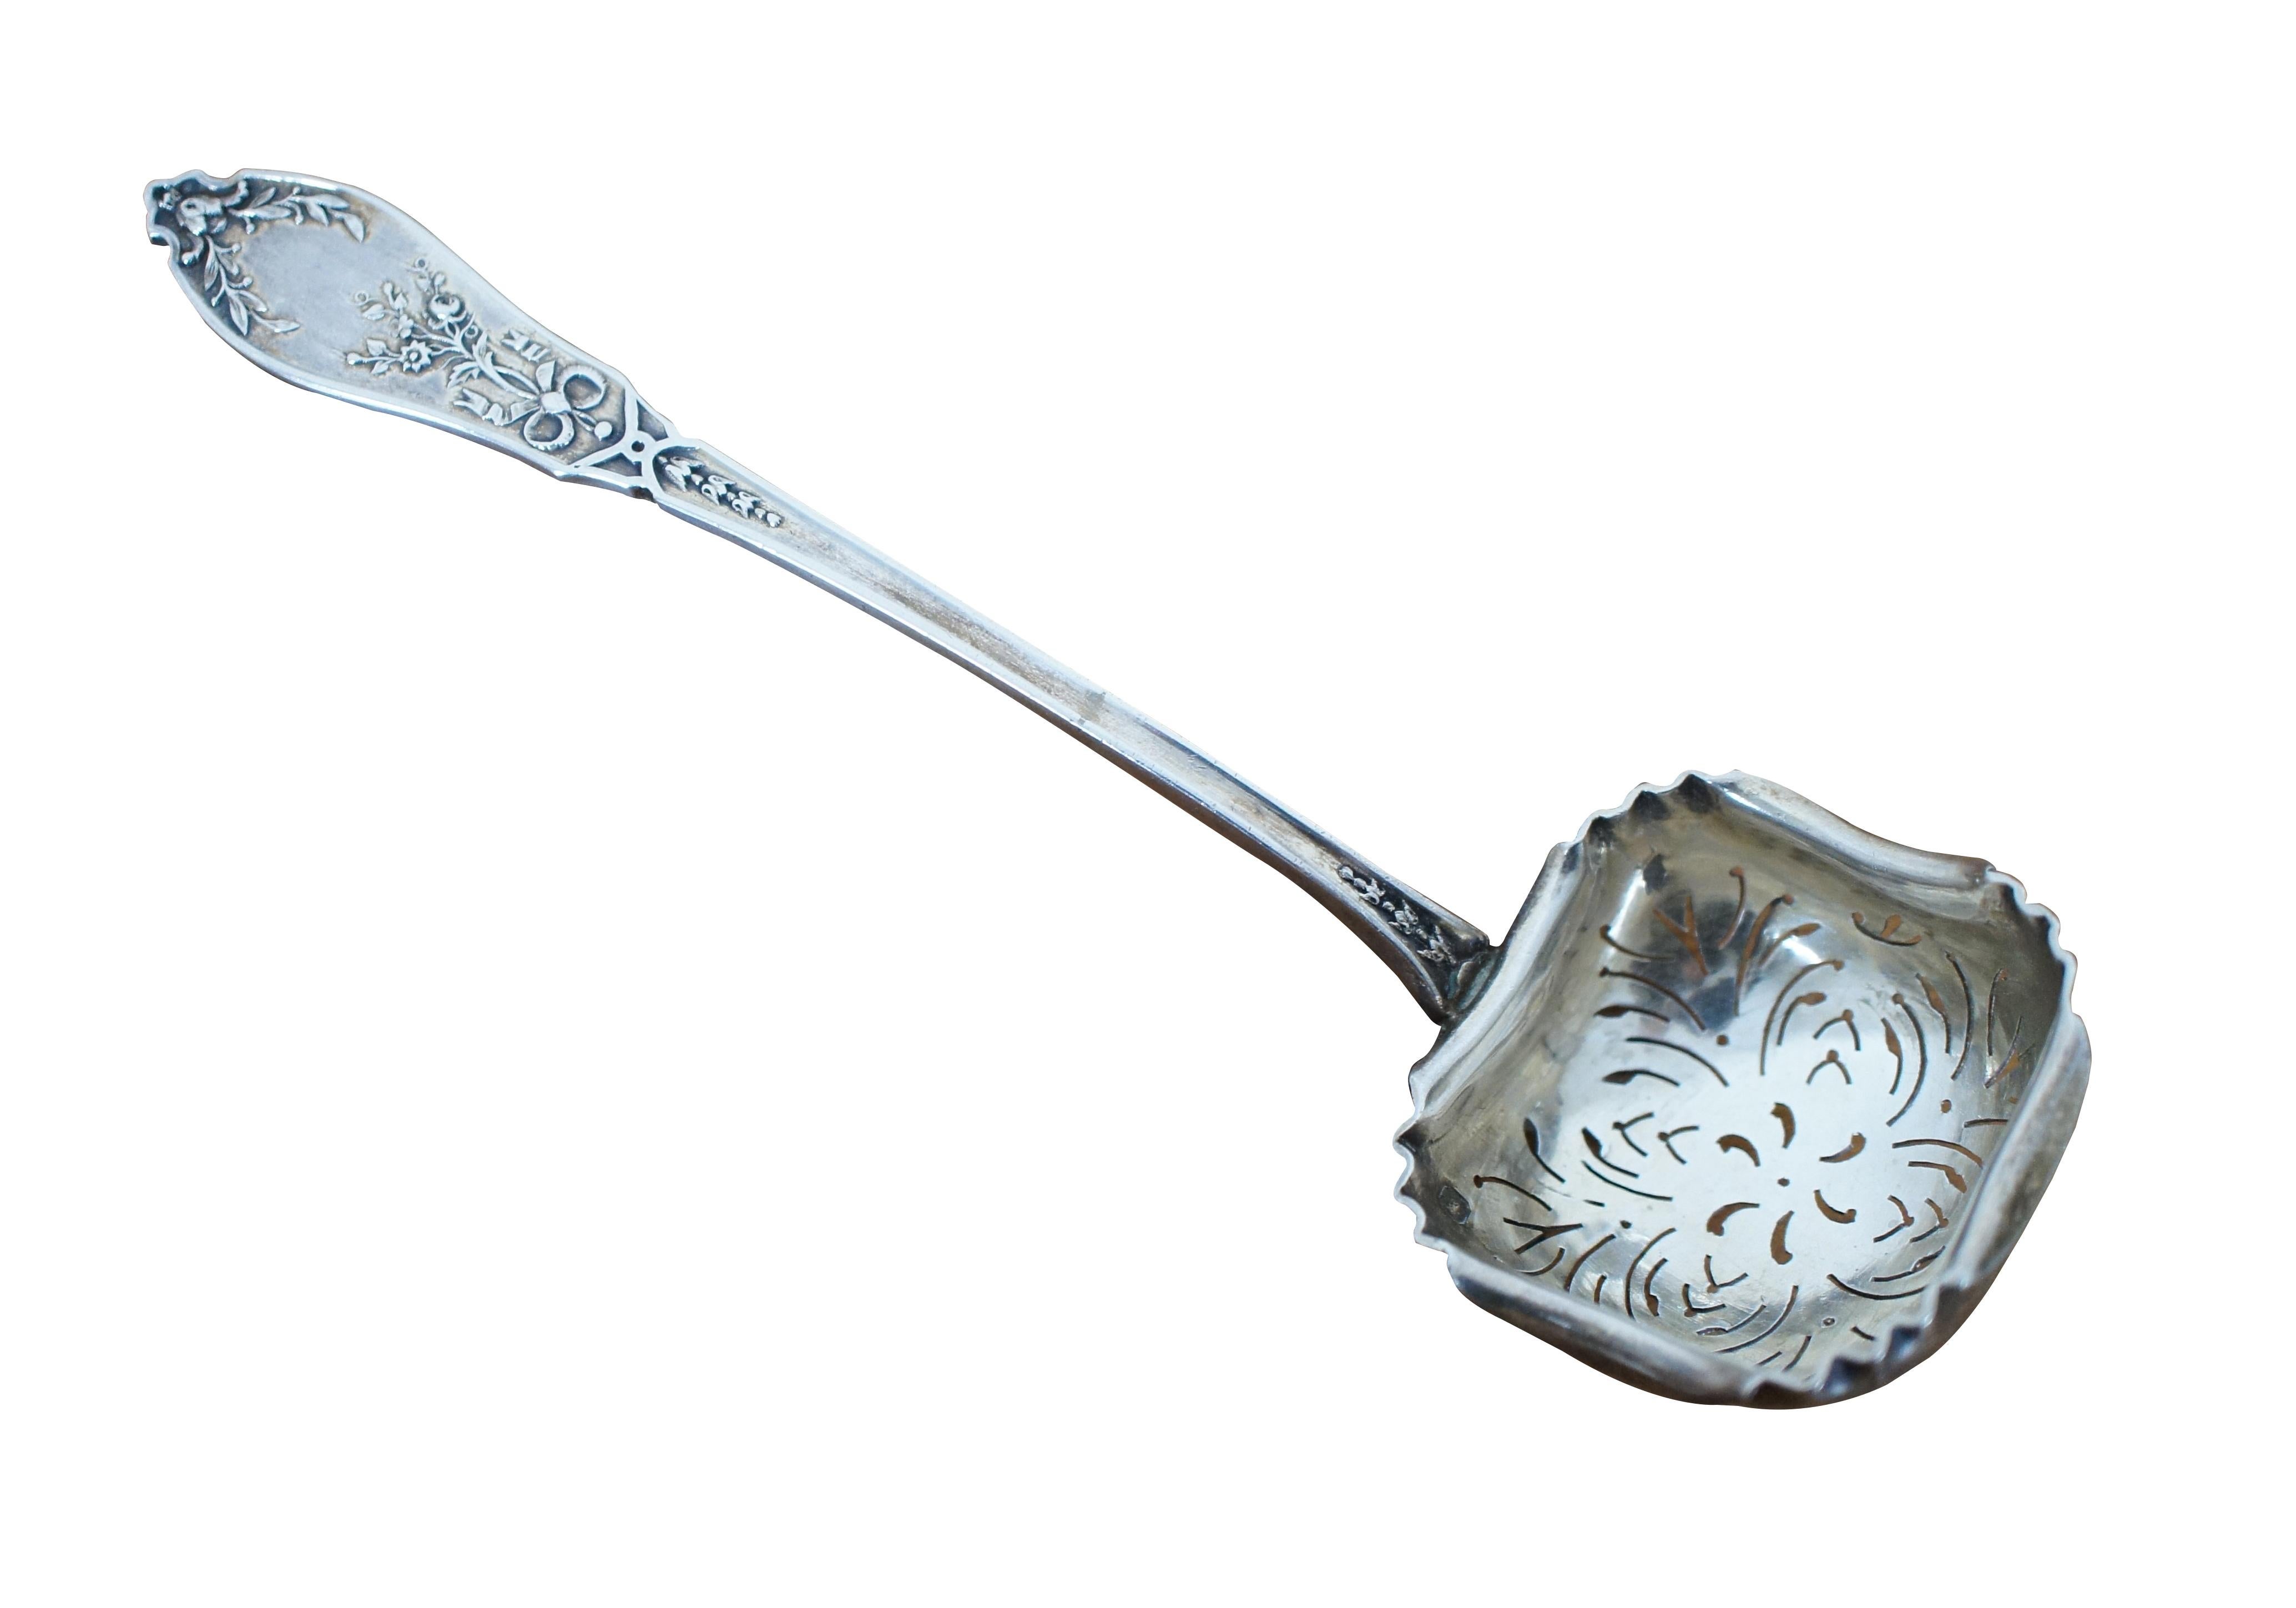 Antique silver pea spoon / tea strainer featuring a ladle shaped pierced bowl with lightly crimped edges and floral monogrammed motif on the handle. 

5.875” x 1.625” x 0.625” (Length x Width x Height) / 31.3 g.